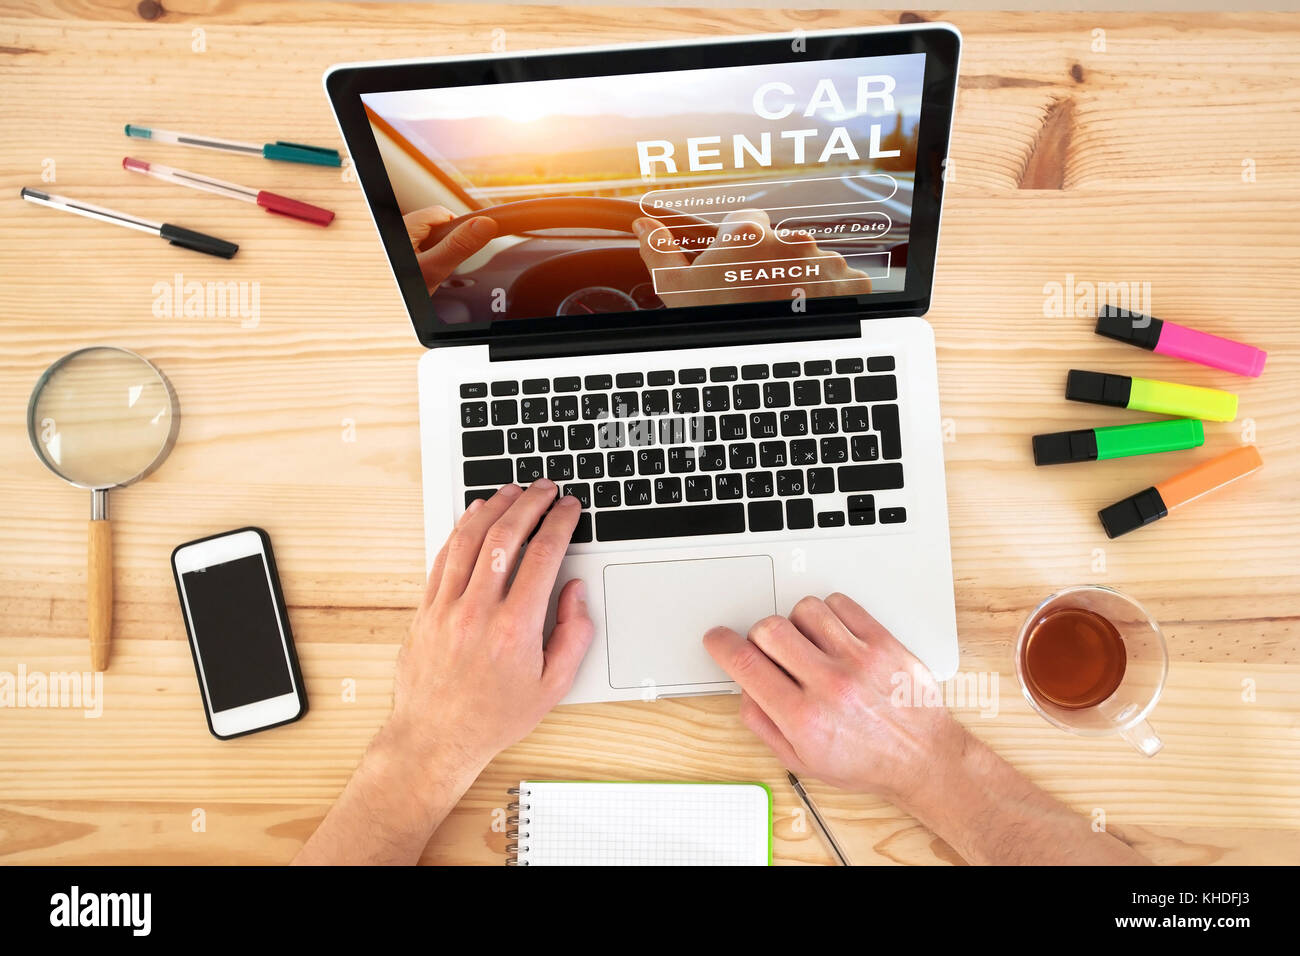 car rental online, internet website to hire vehicle Stock Photo